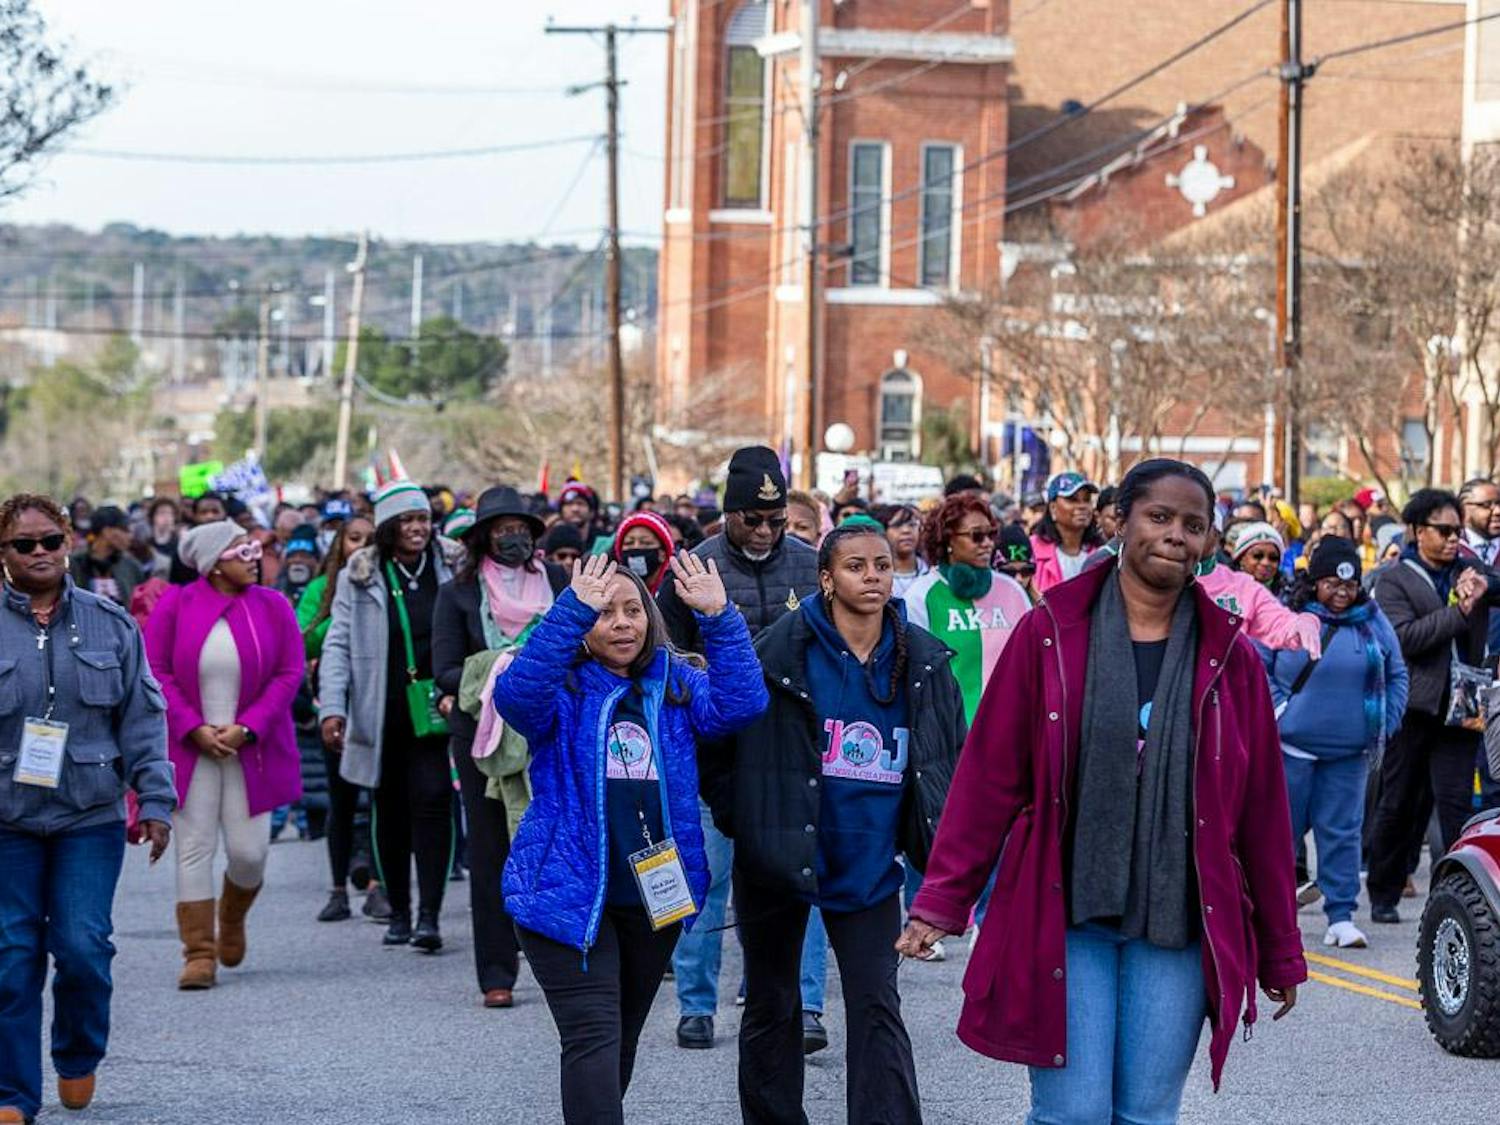 Members of the community march toward the South Carolina Statehouse before the King Day at the Dome event on Jan. 15, 2024. The annual event starts with a church service commemorating Dr. Martin Luther King Jr. at Zion Baptist Church and transitions to the South Carolina Statehouse where civil rights leaders, state representatives and national leaders give speeches commemorating Dr. King and his continued legacy for equality.